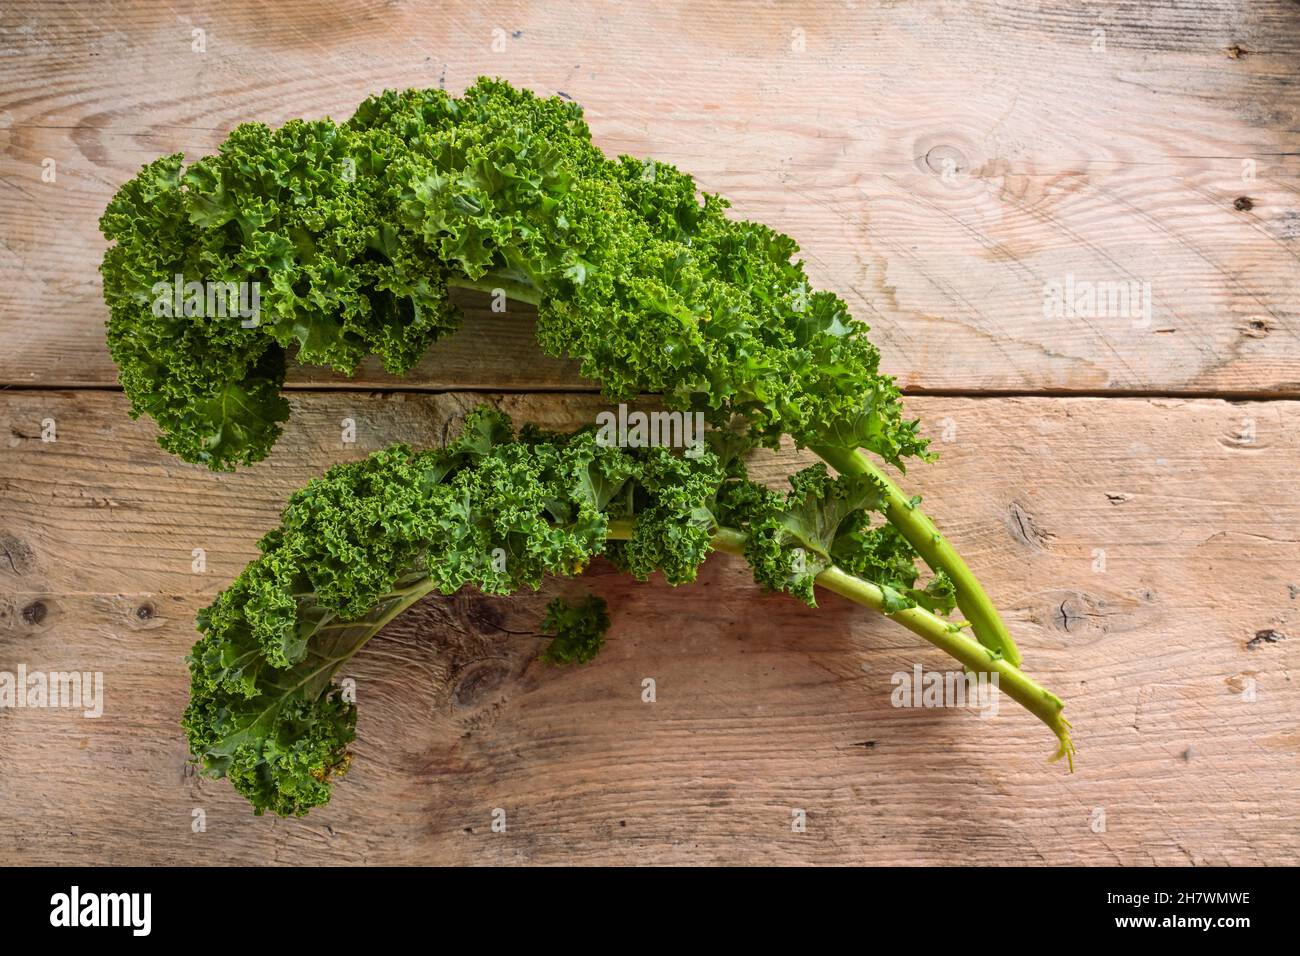 Curly leaves of kale or green leaf cabbage on rustic wooden planks, healthy winter vegetable, copy space, top view from above, selected focus Stock Photo